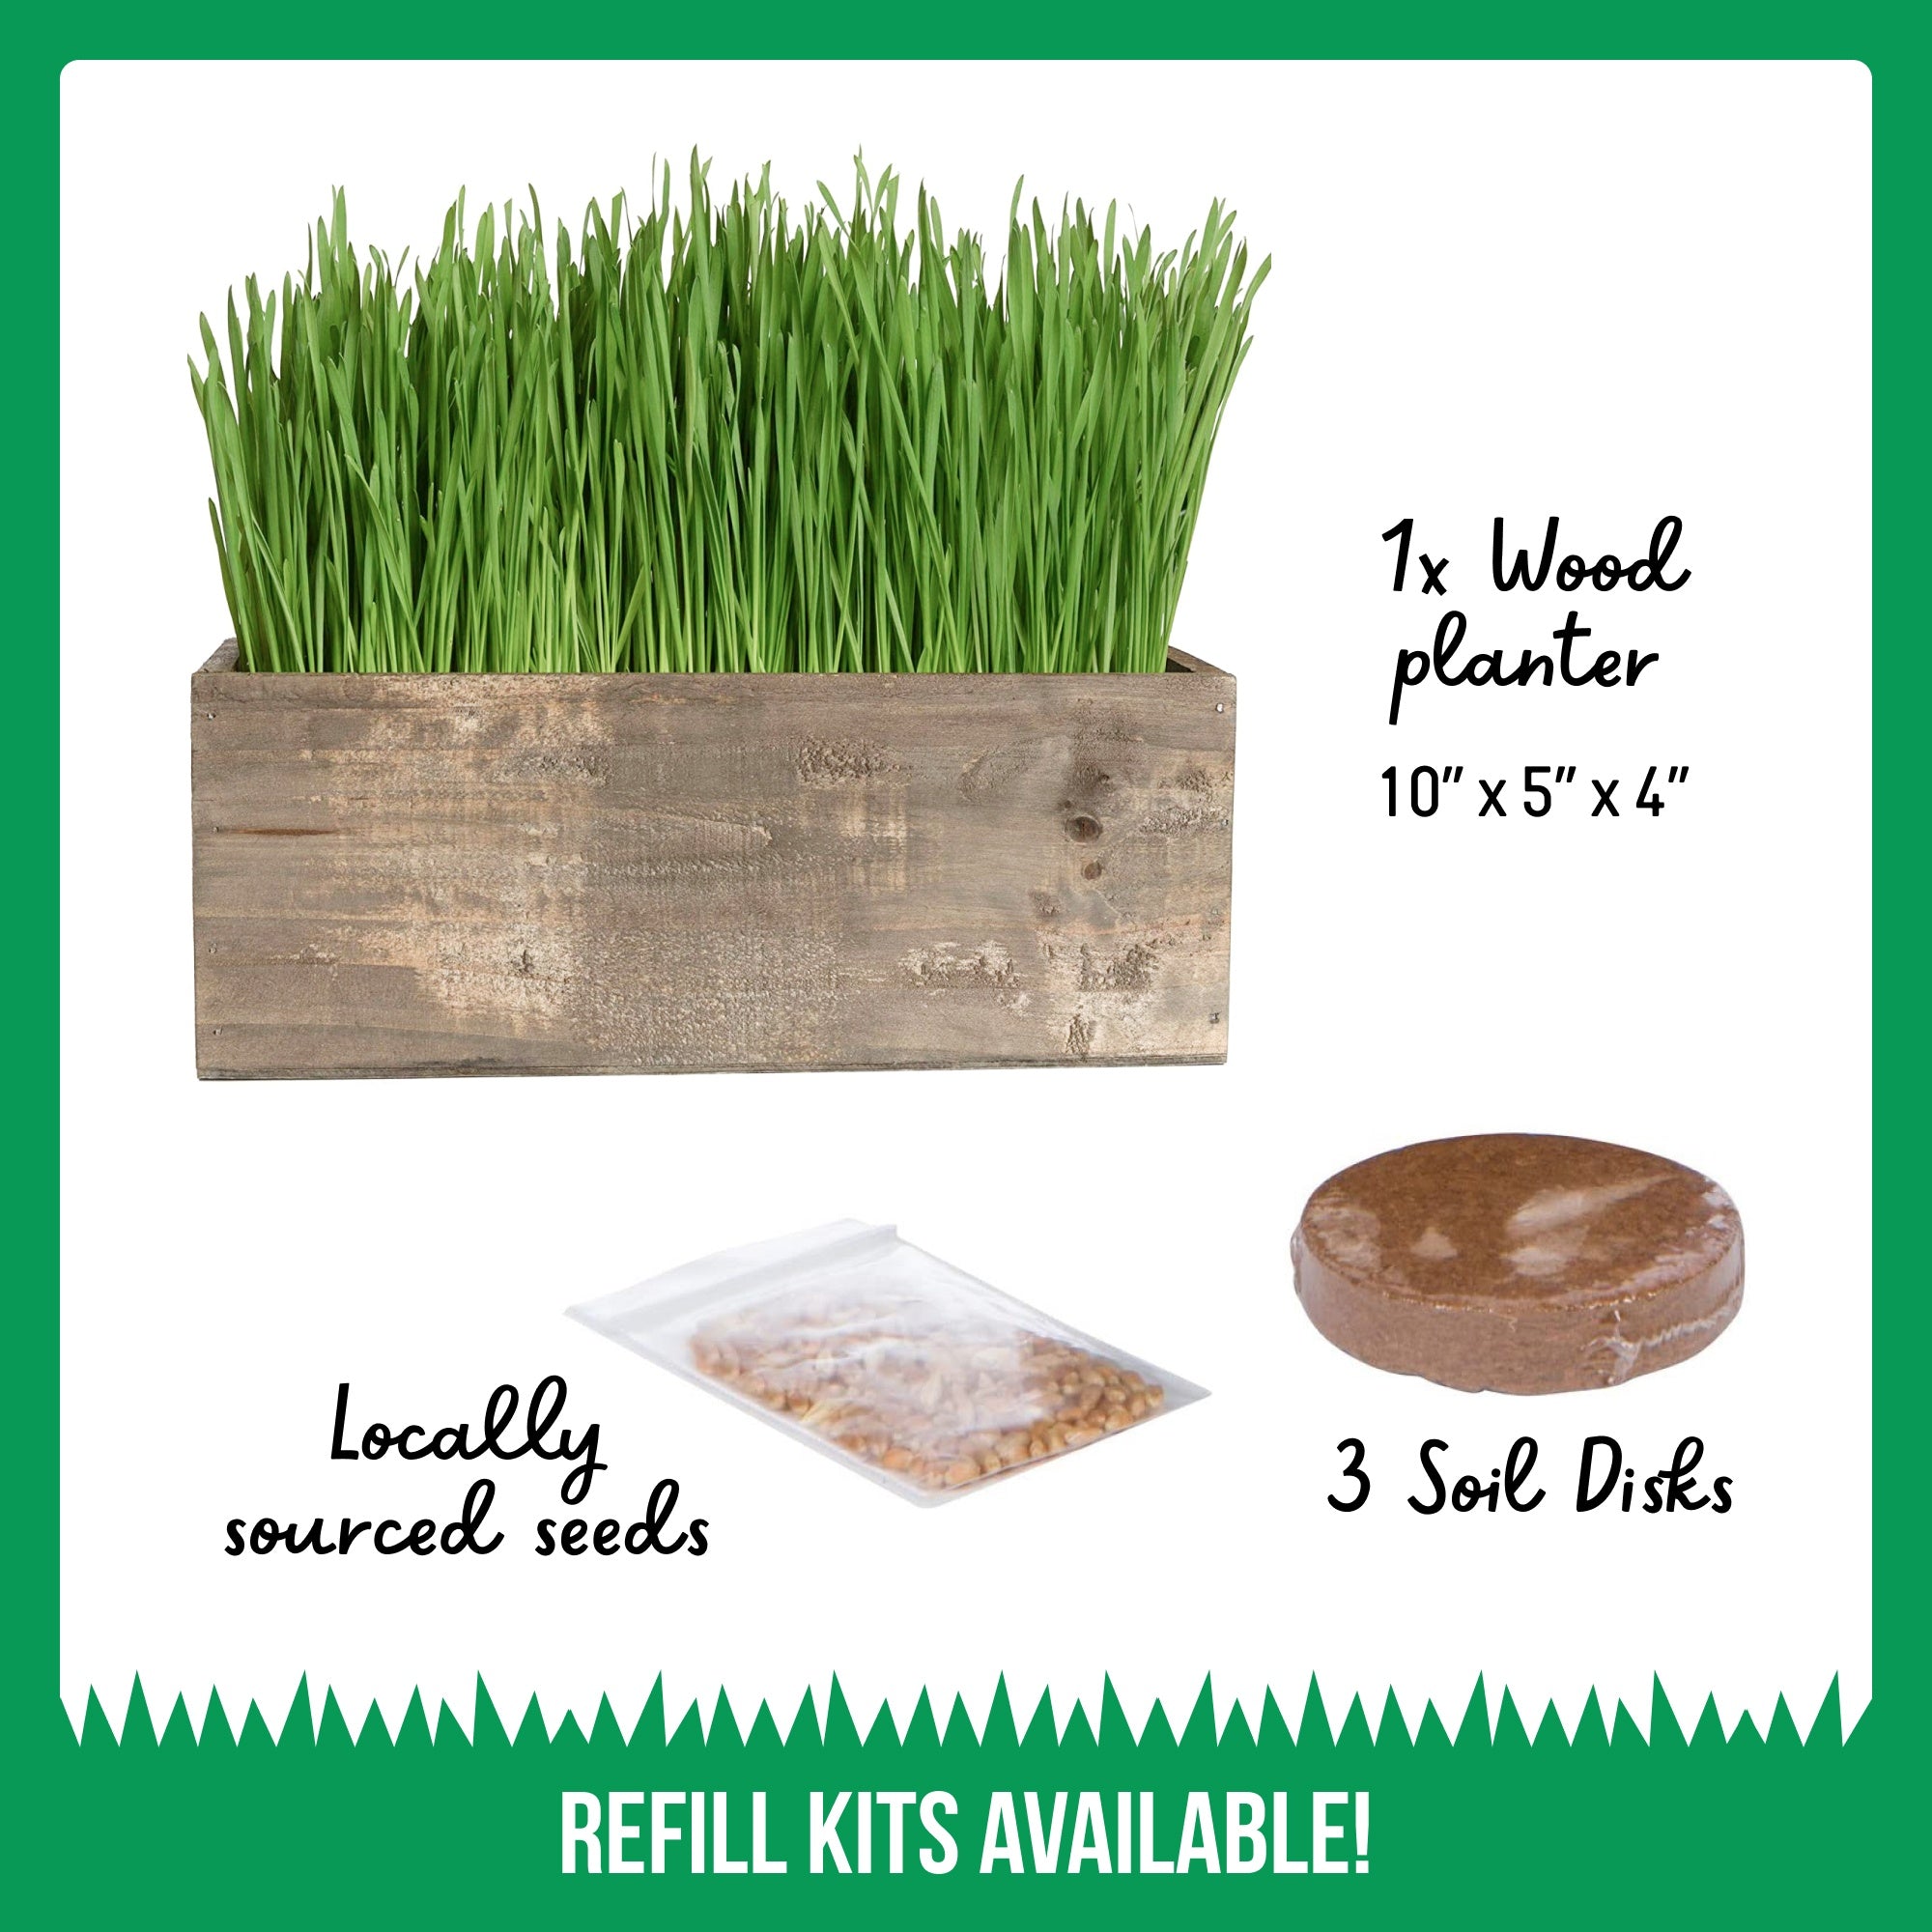 Cat Grass Kit (Organic) Complete with Rustic Wood Planter, Seed and Soil - Dark Brown